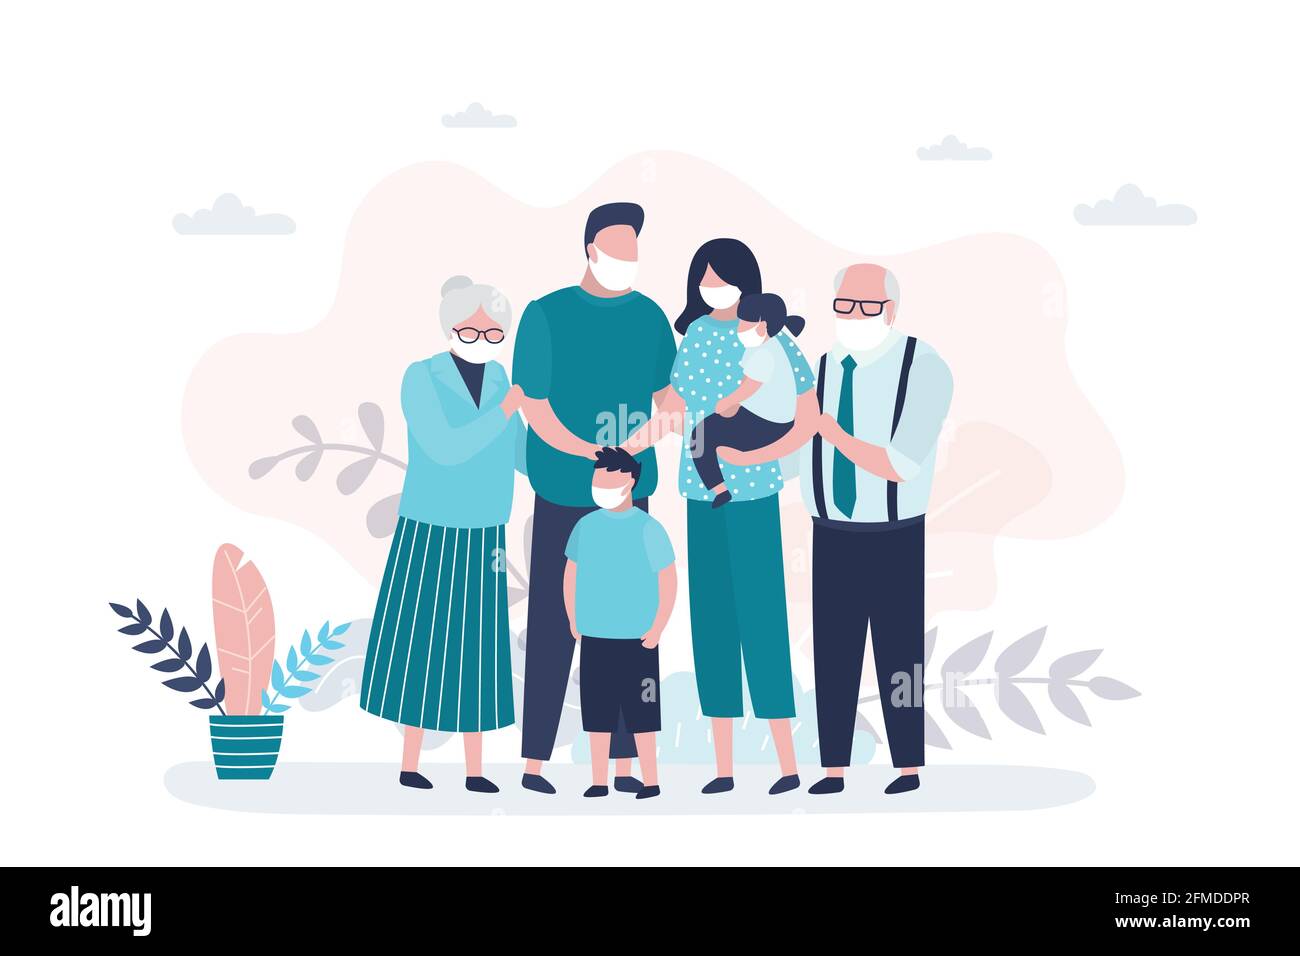 People in safety masks stop the spread of viruses. Family portrait. Happy parents with children. Grandparents, Mother,father and two kids. Cute huge f Stock Vector